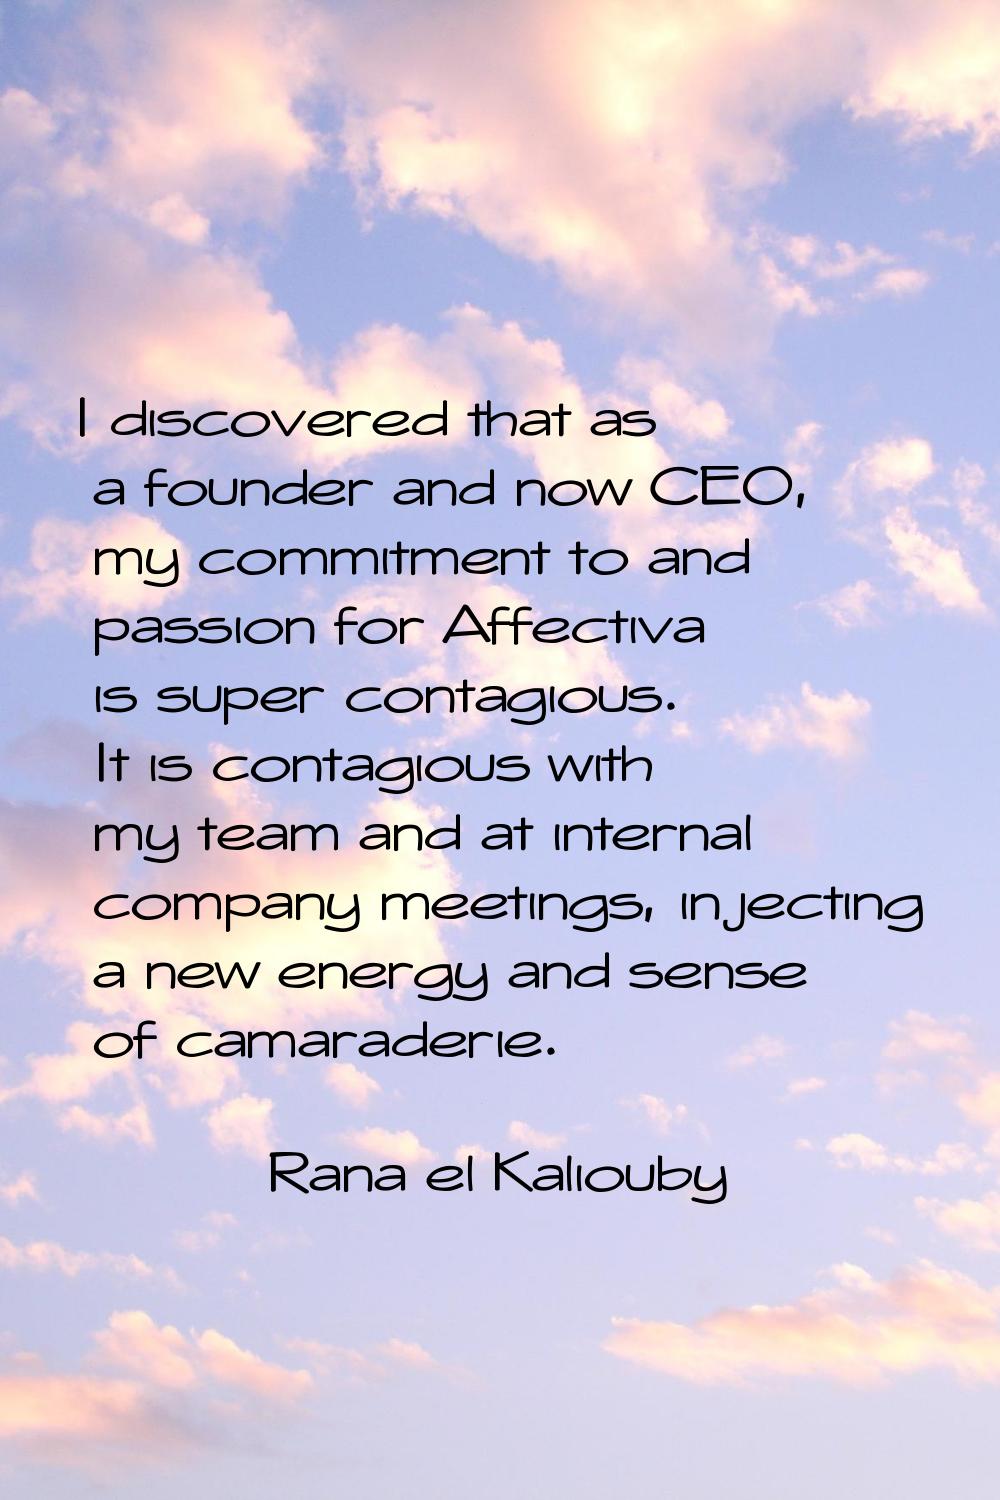 I discovered that as a founder and now CEO, my commitment to and passion for Affectiva is super con